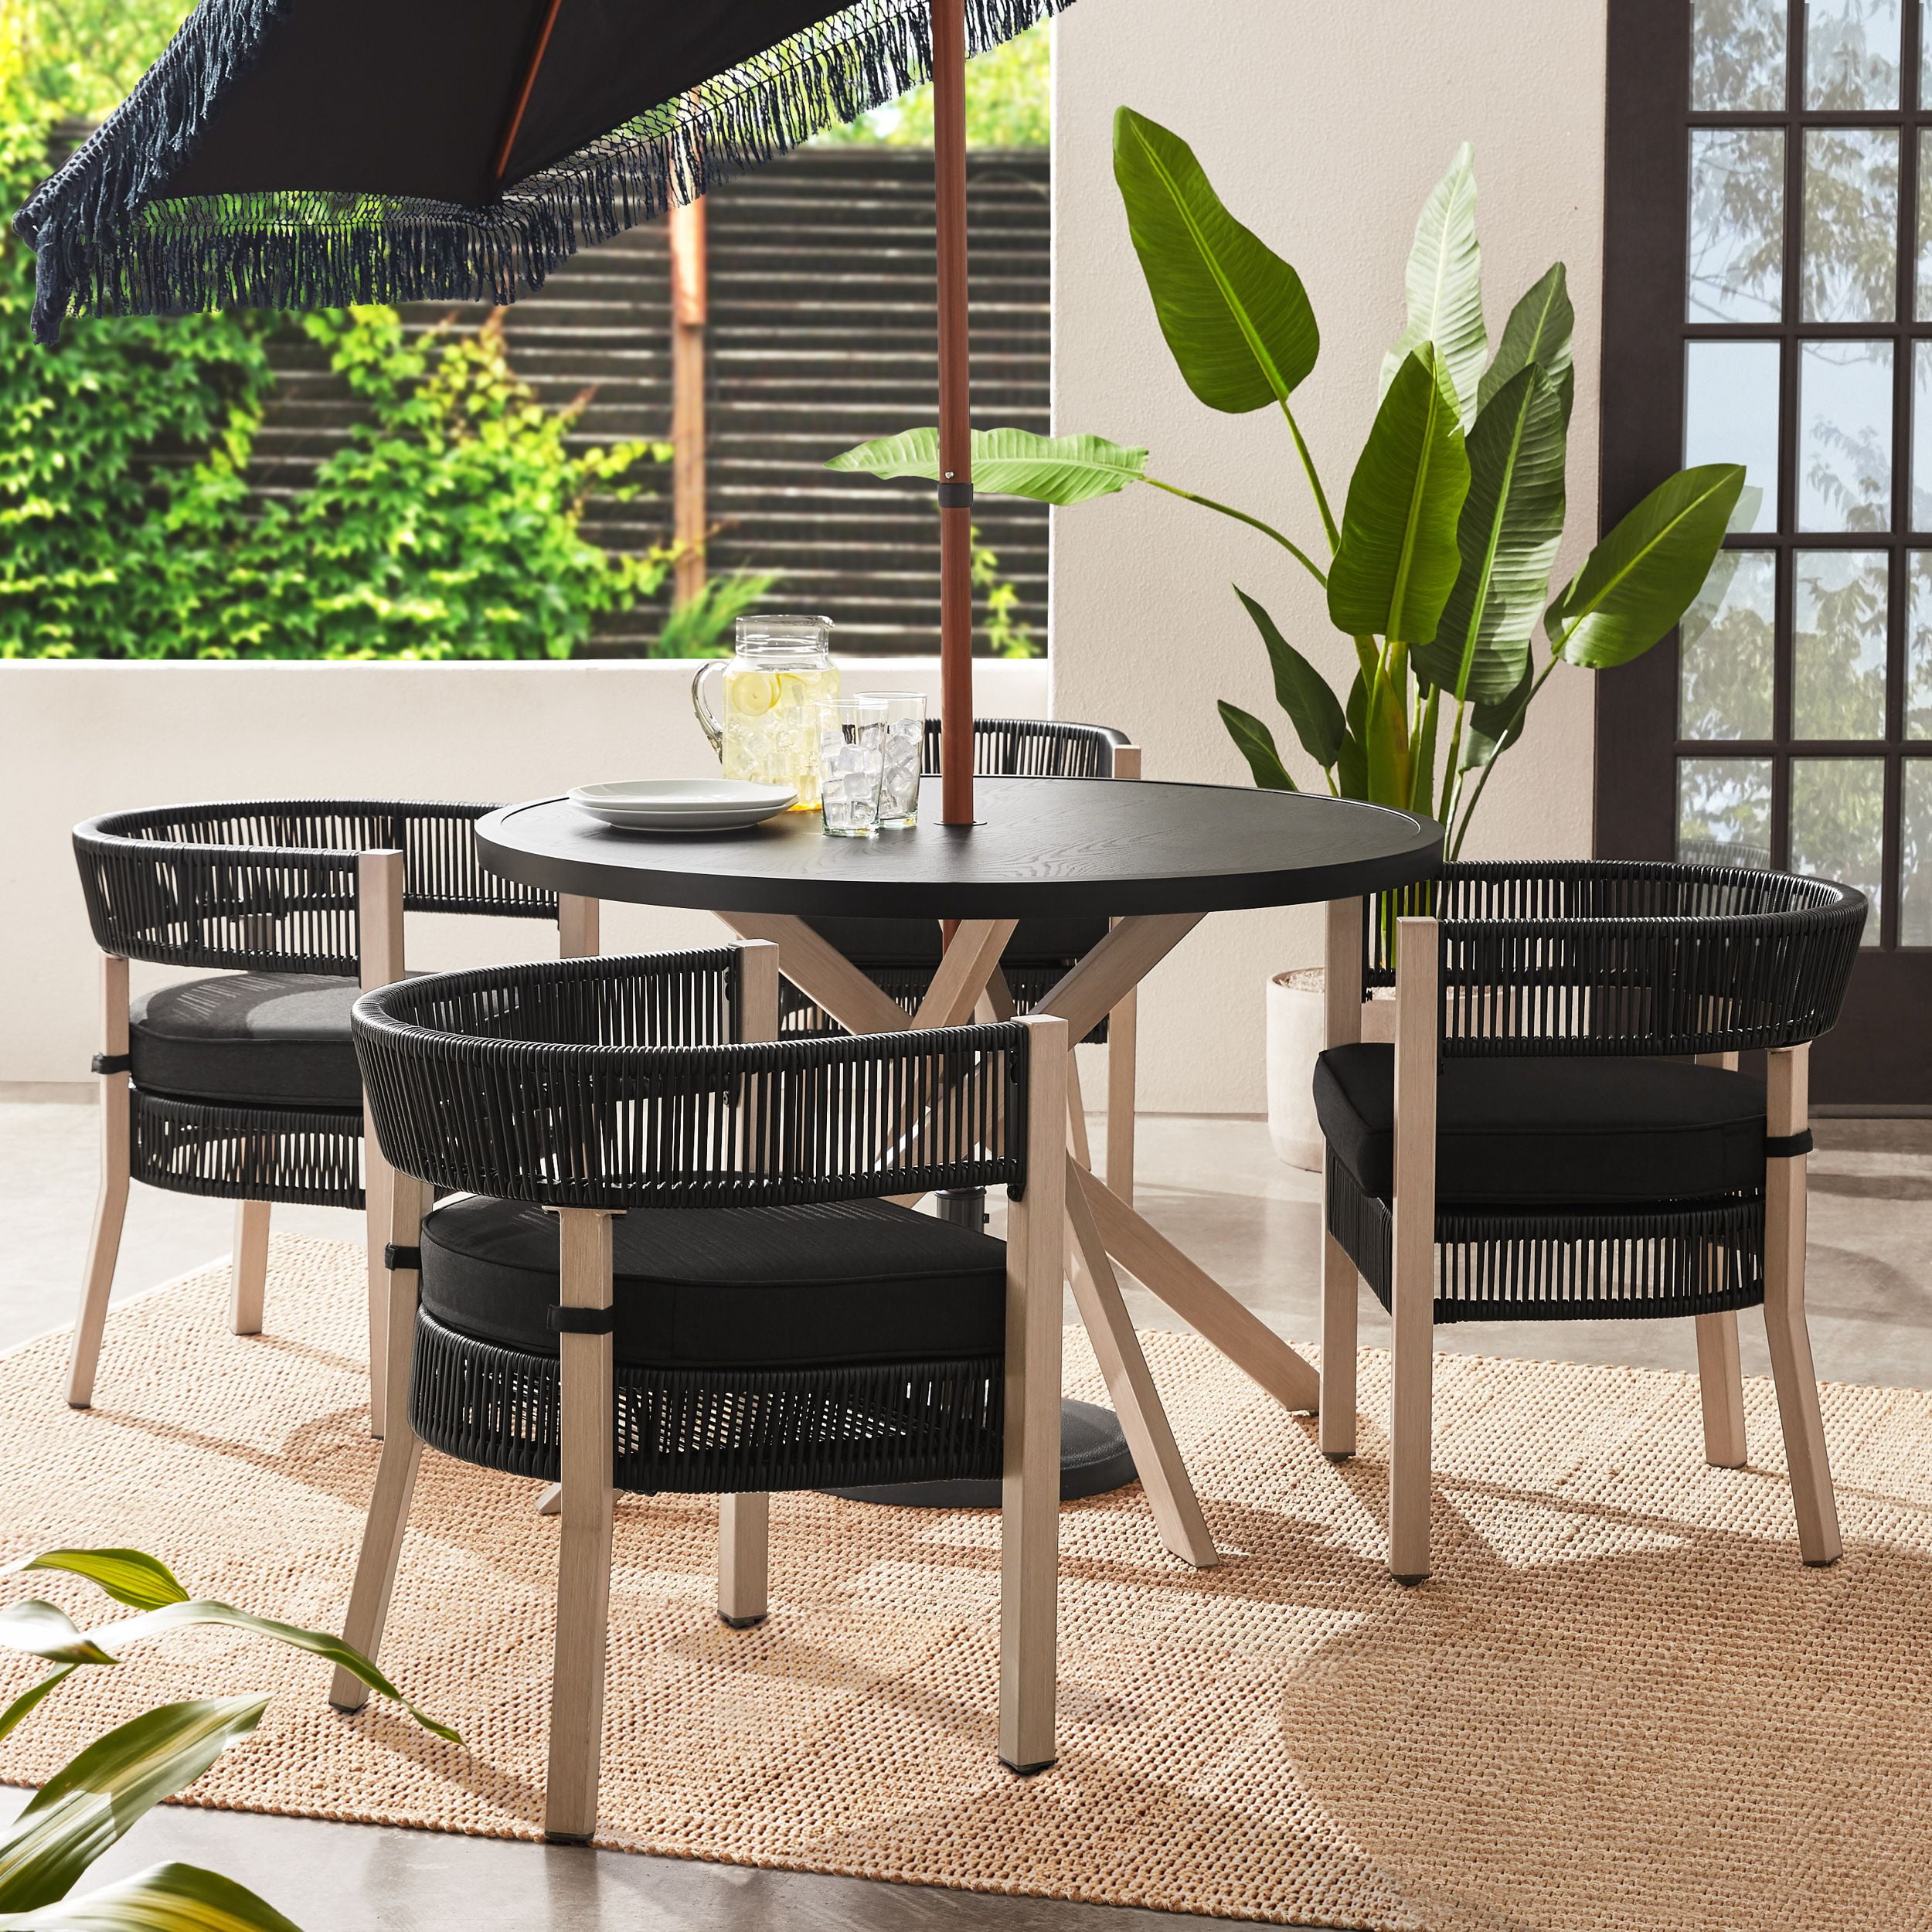 Affordable outdoor dining supplies